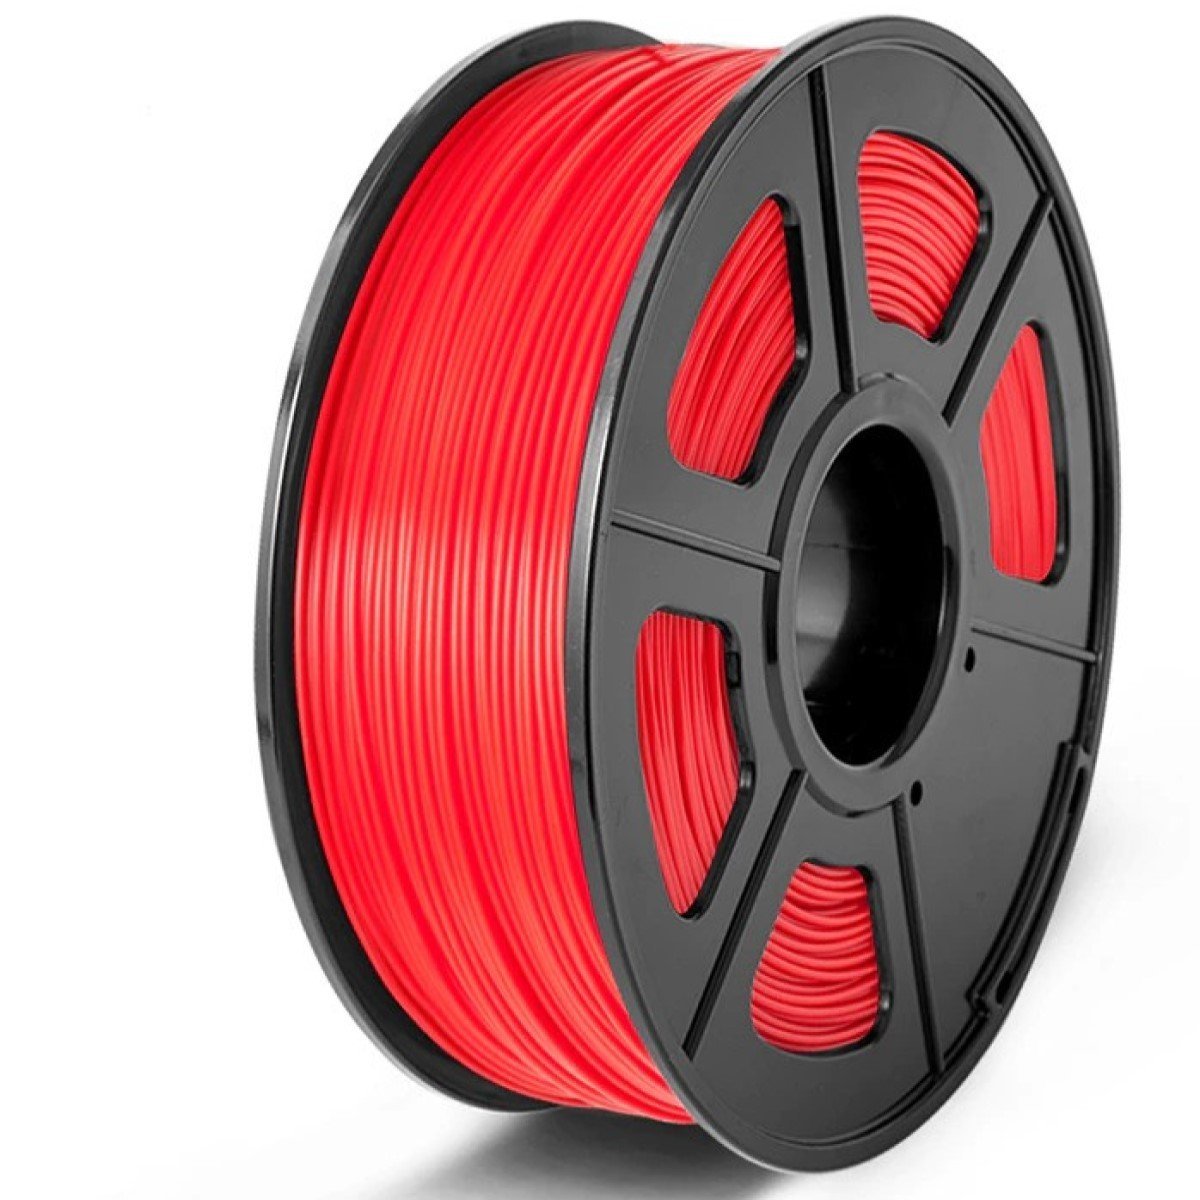 Red ABS 3D Printer Filament 1.75mm 1Kg Spool (2.2lbs), Dimensional Accuracy of +/- 0.02mm